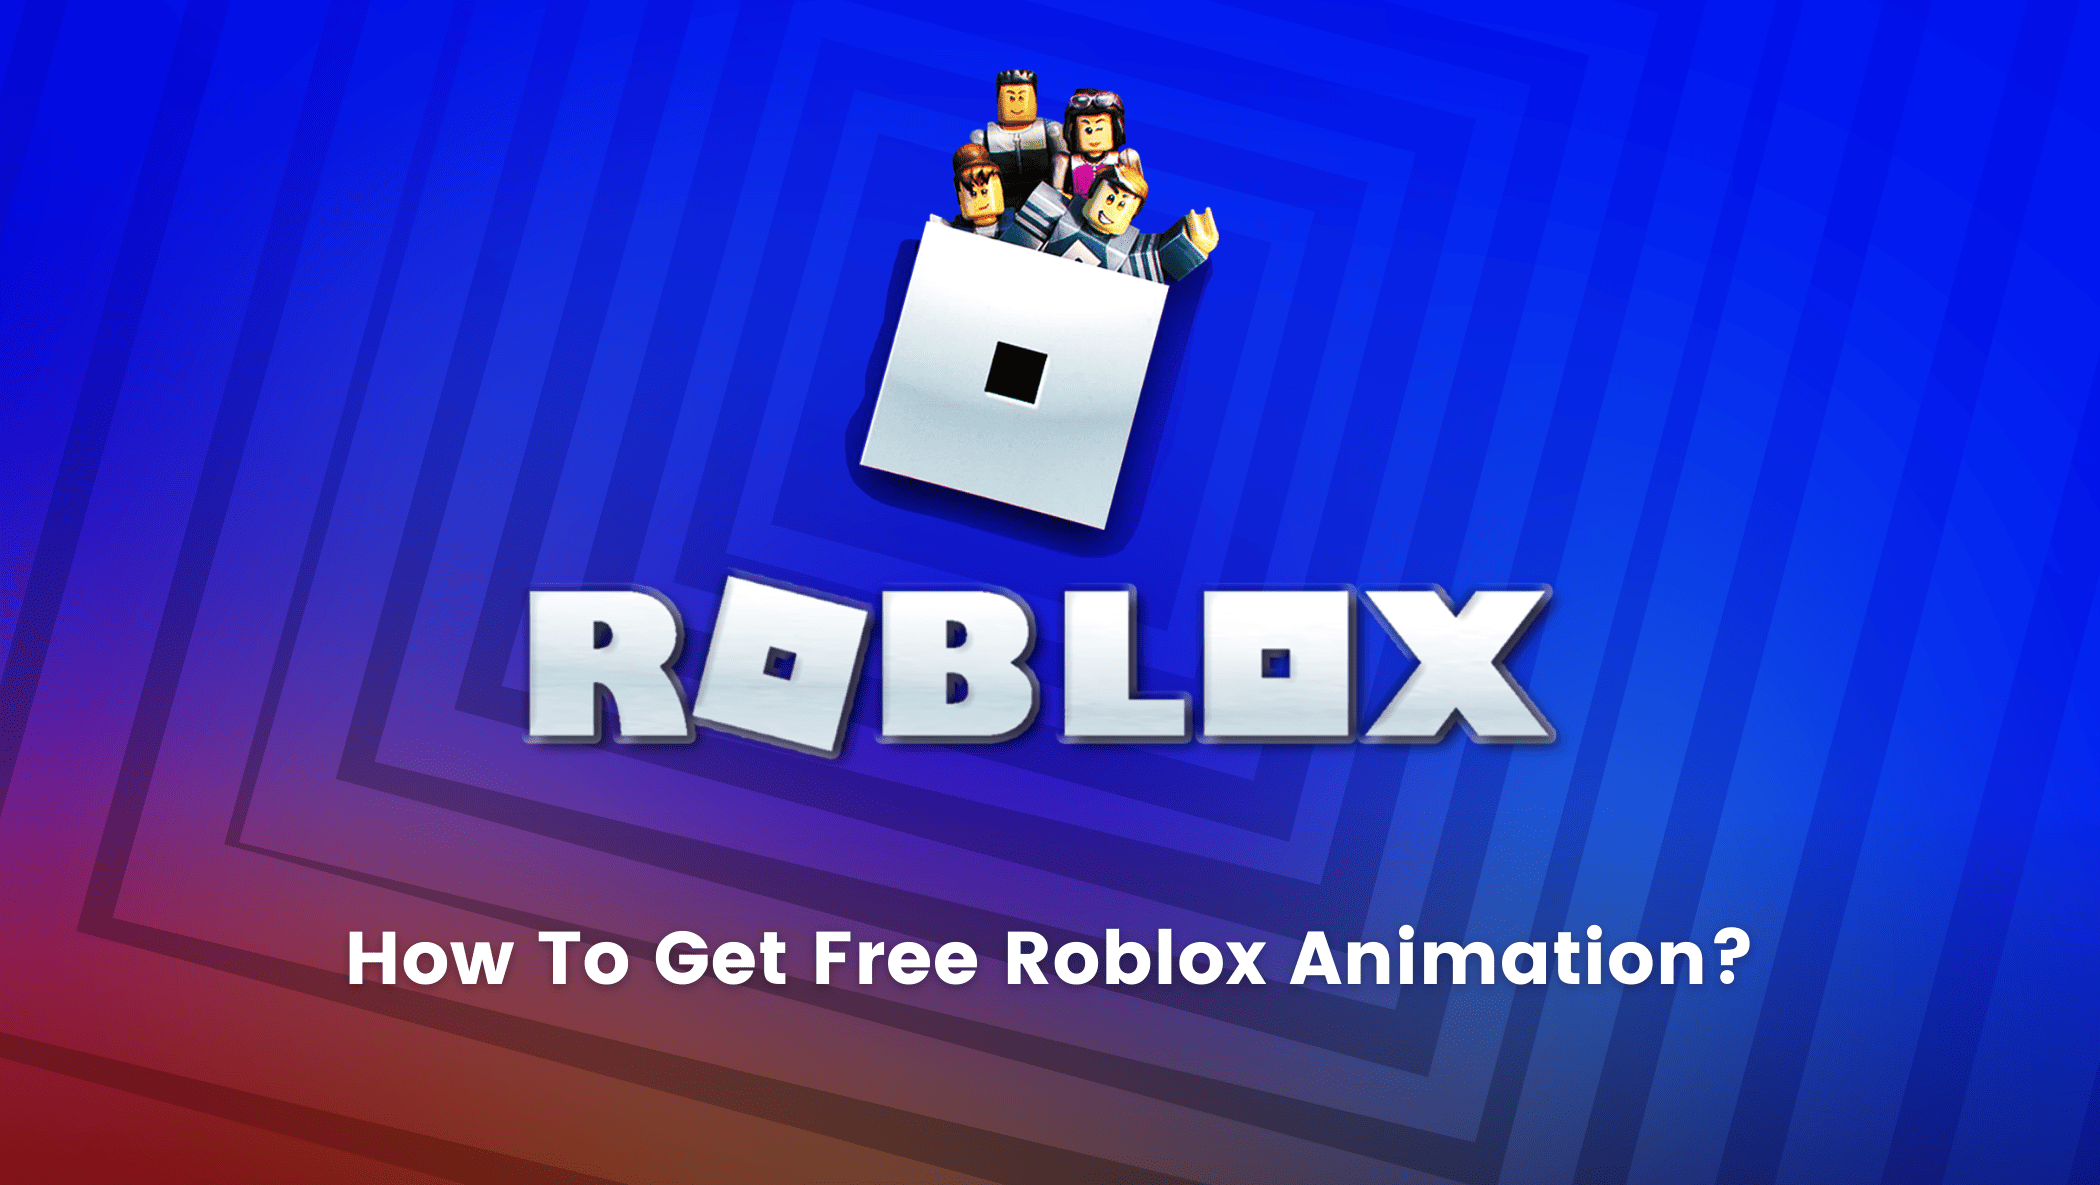 How To Get Free Roblox Animation